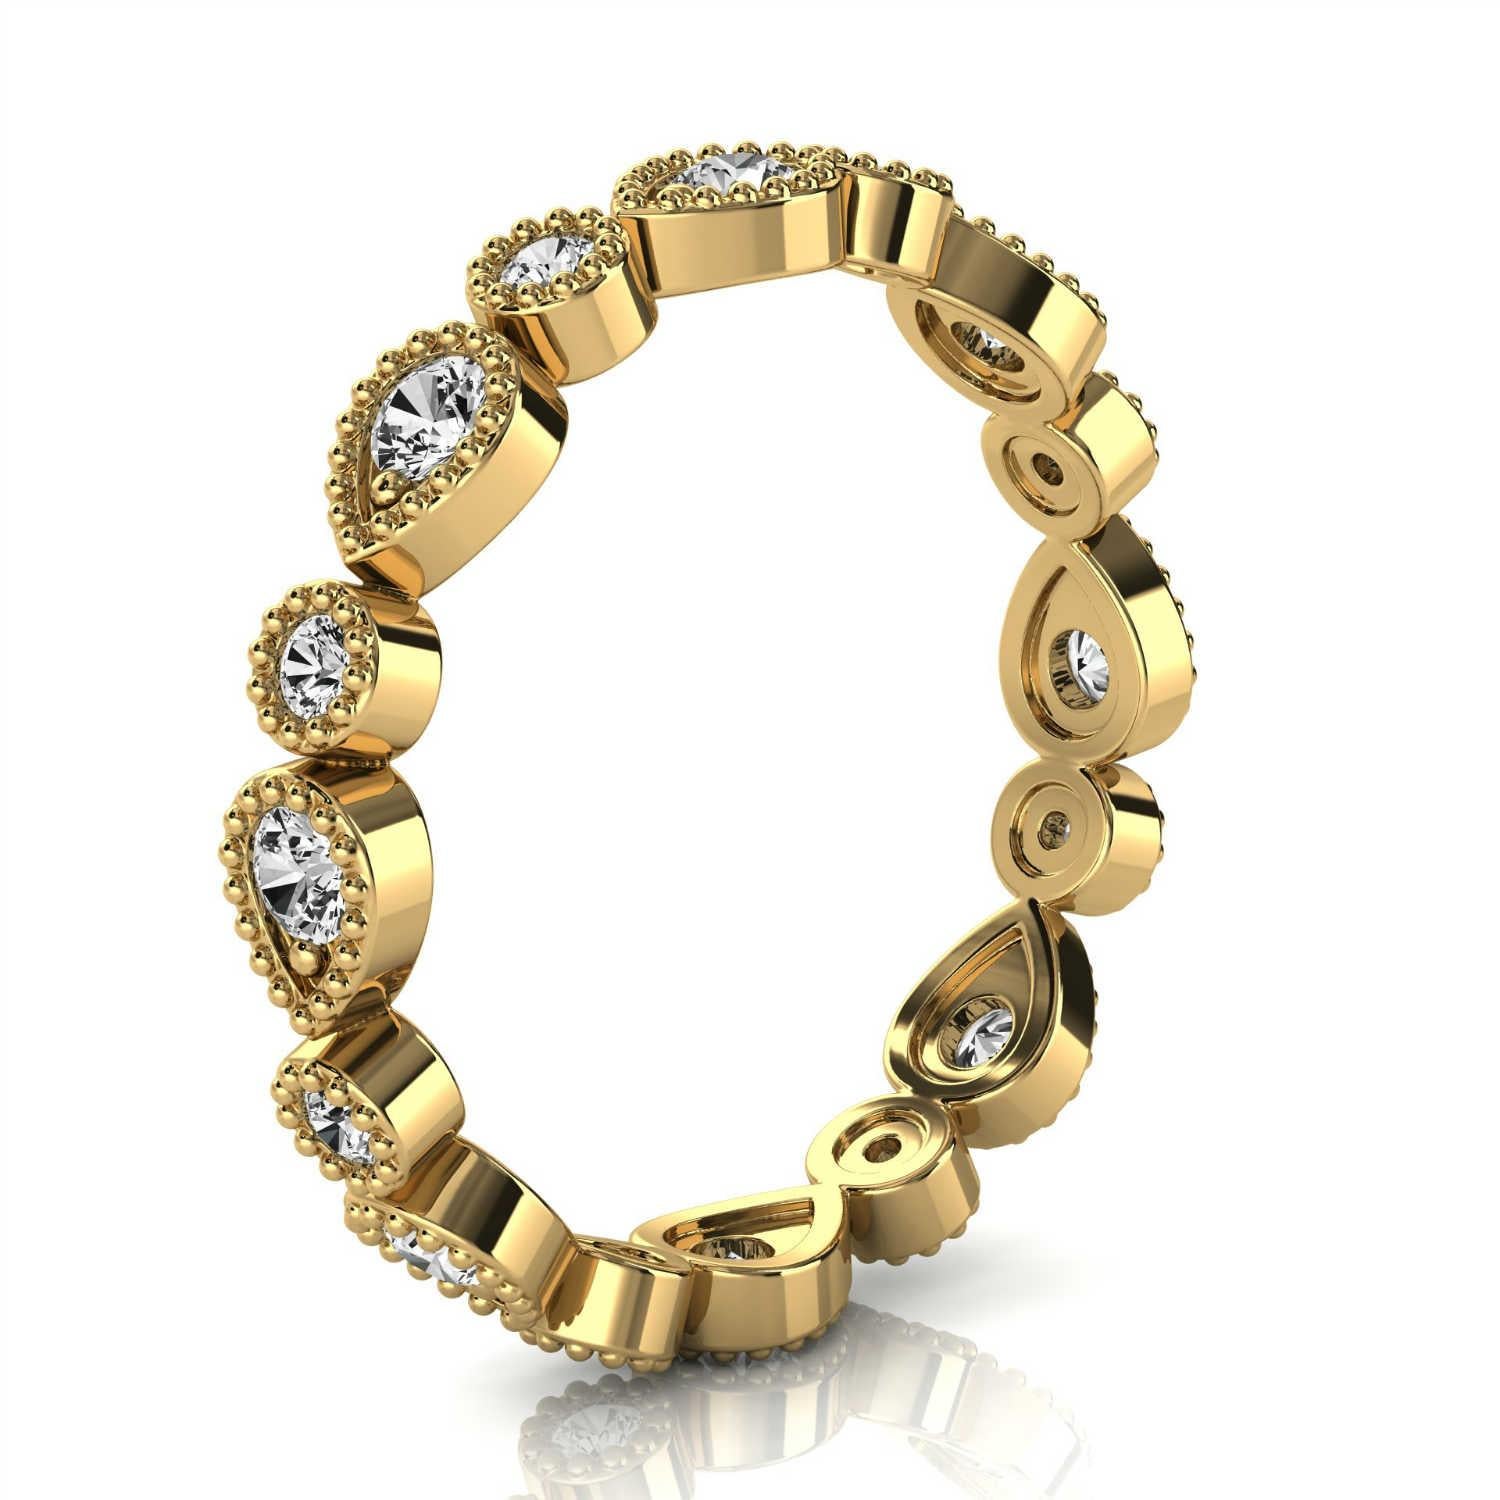 This Delicate and unique eternity band features sixteen round melee diamonds set in alternating shapes of round and pear crowns. The delicate Milgrain around the edges enhances the vintage and earthy design. Experience the difference in